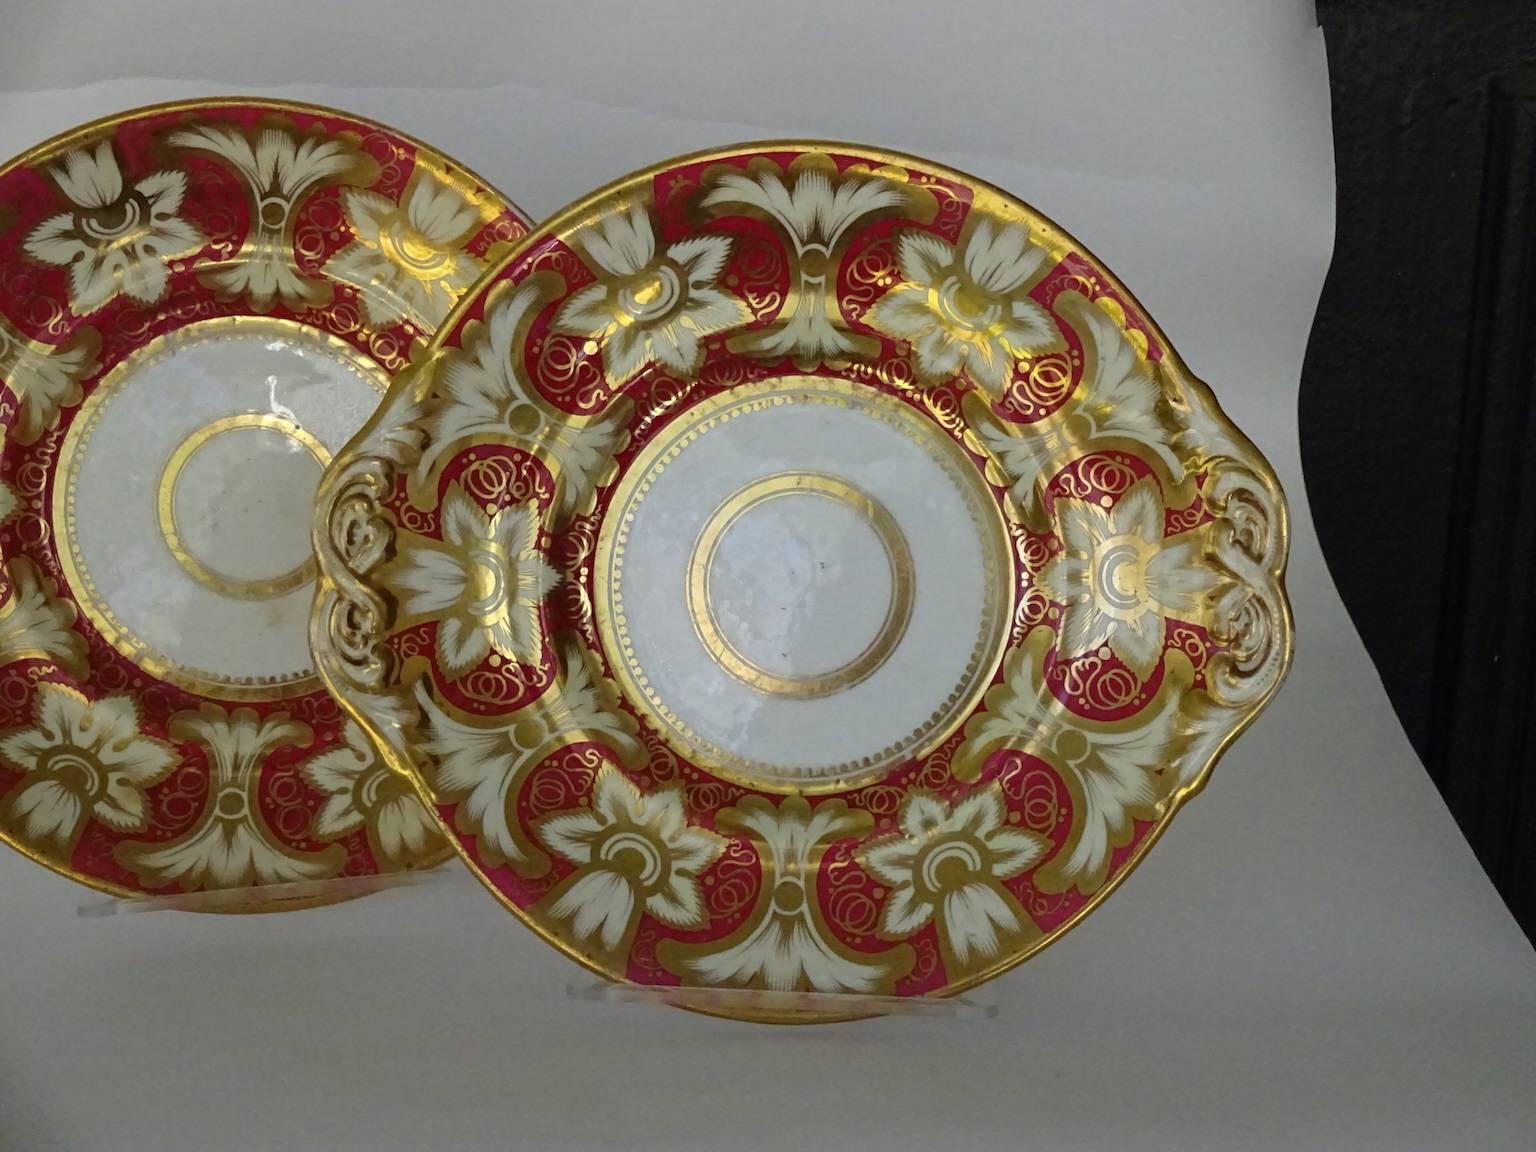 Pair of red and gold Victorian plates, on white ground. Flowers and flourishes.
Ovoid shape. Probably dessert plates, but lovely decorative plates for any table. No maker's mark but probably English and circa 1850.